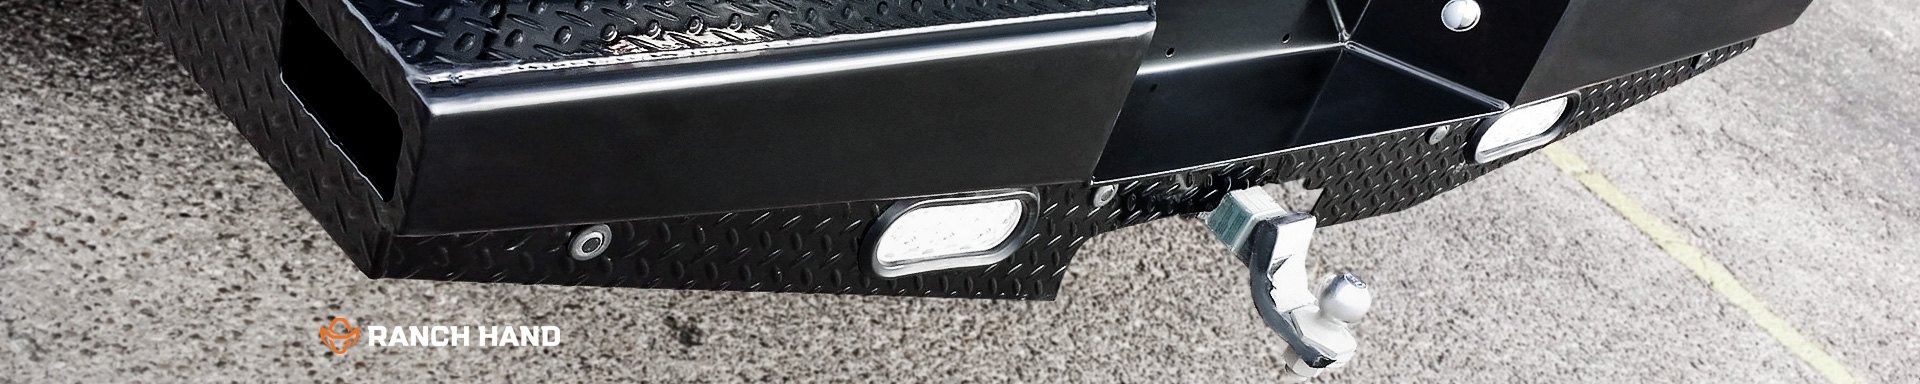 Ranch Hand Off-Road Bumpers